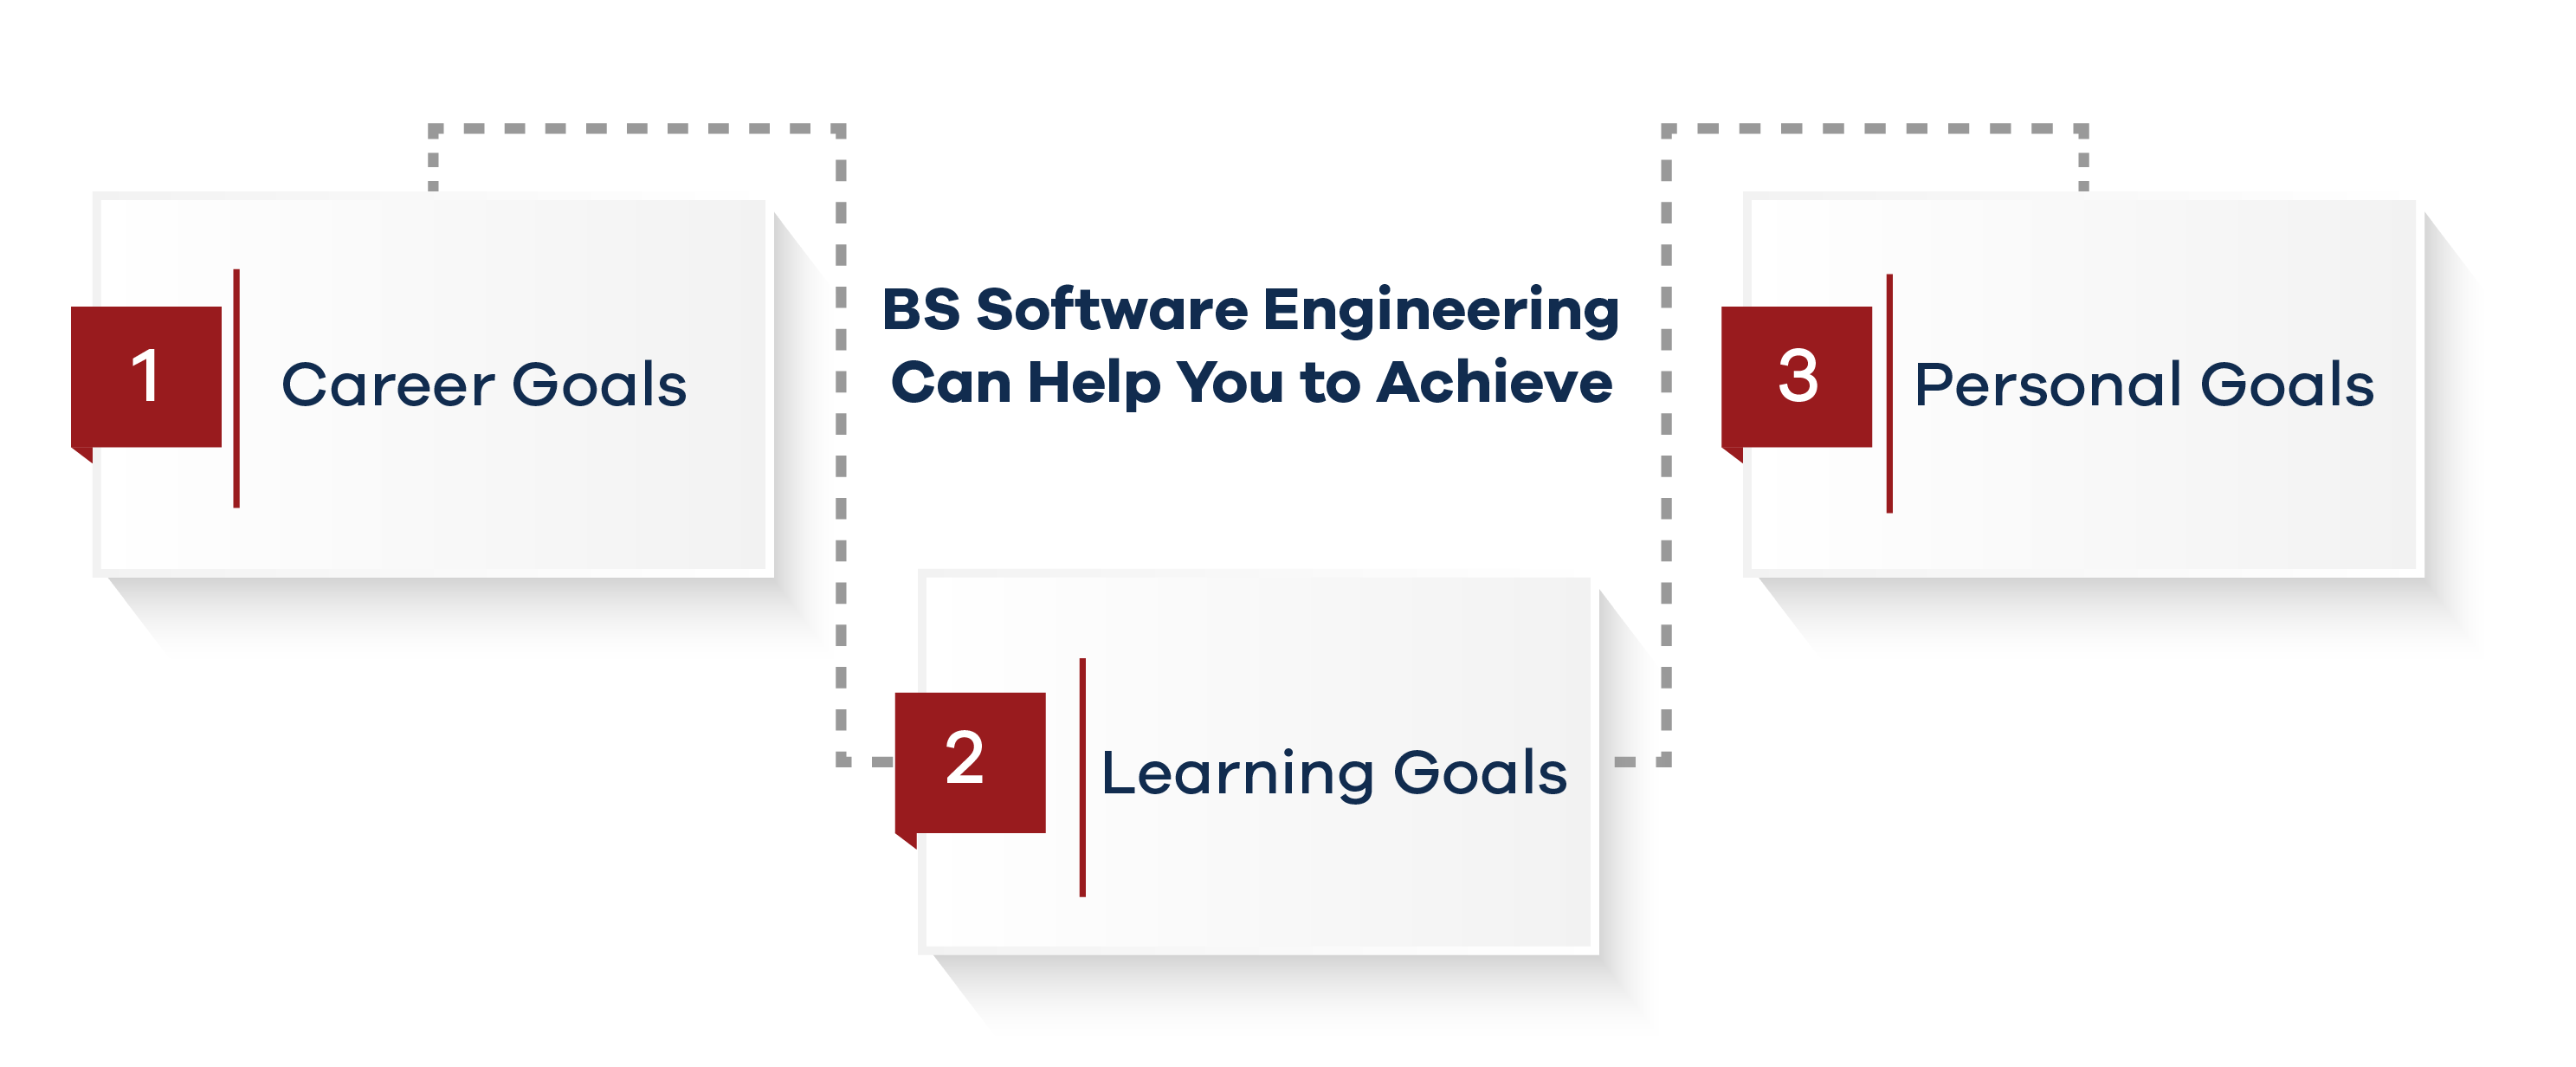 What Goals Can You Pursue with BS Software Engineering? 